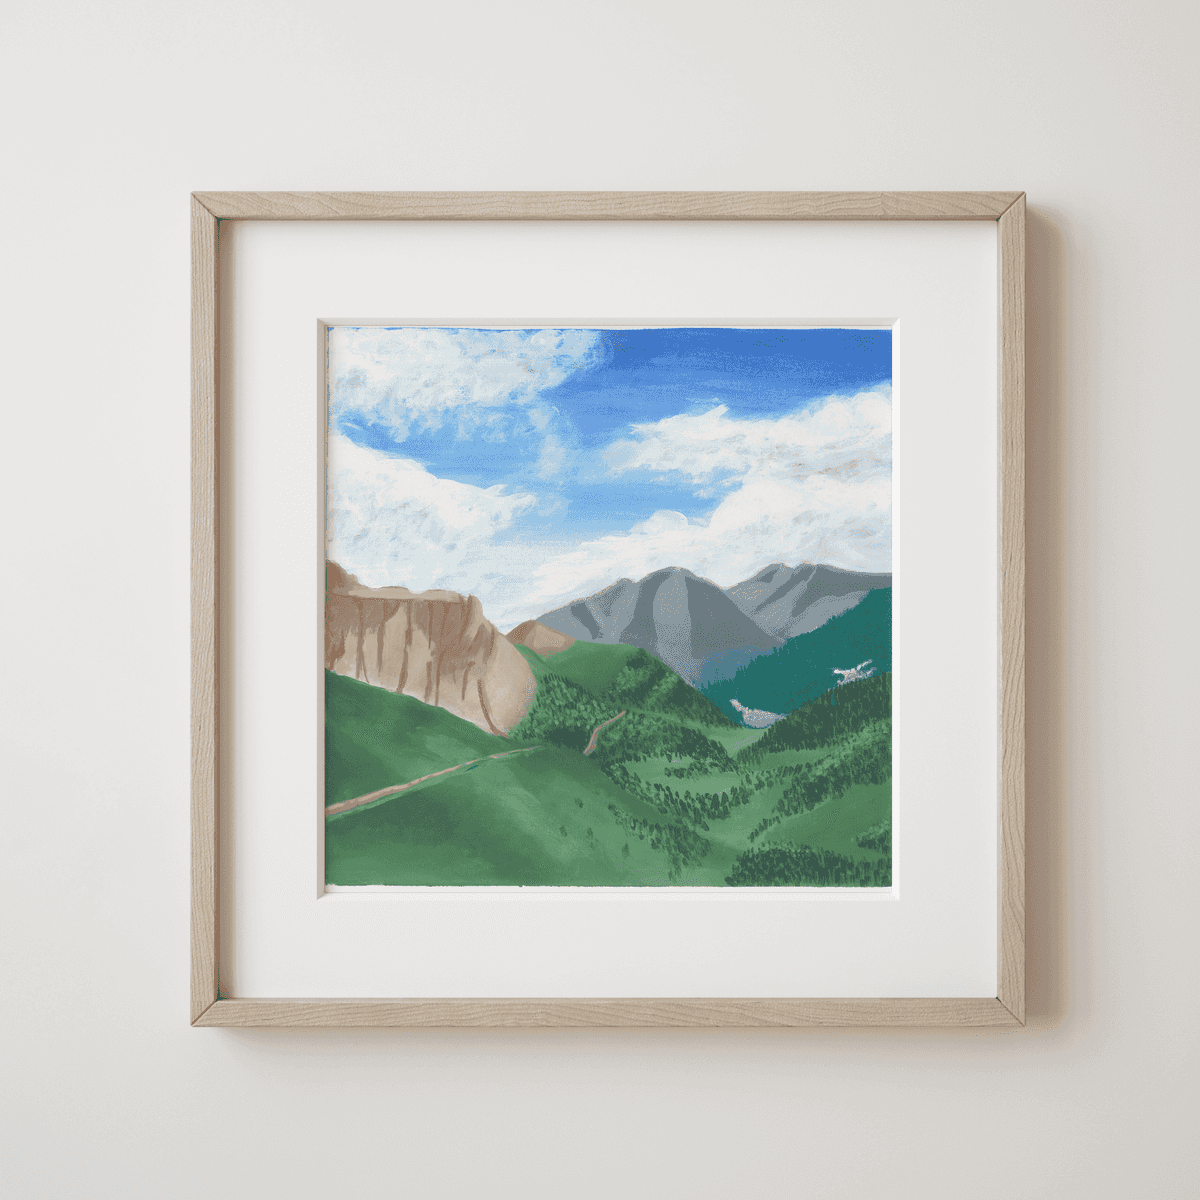 Echoes in the Alps - Bright Day Over Green Valleys and Majestic Mountains Fine Art Print - nature soundscape art - earth.fm